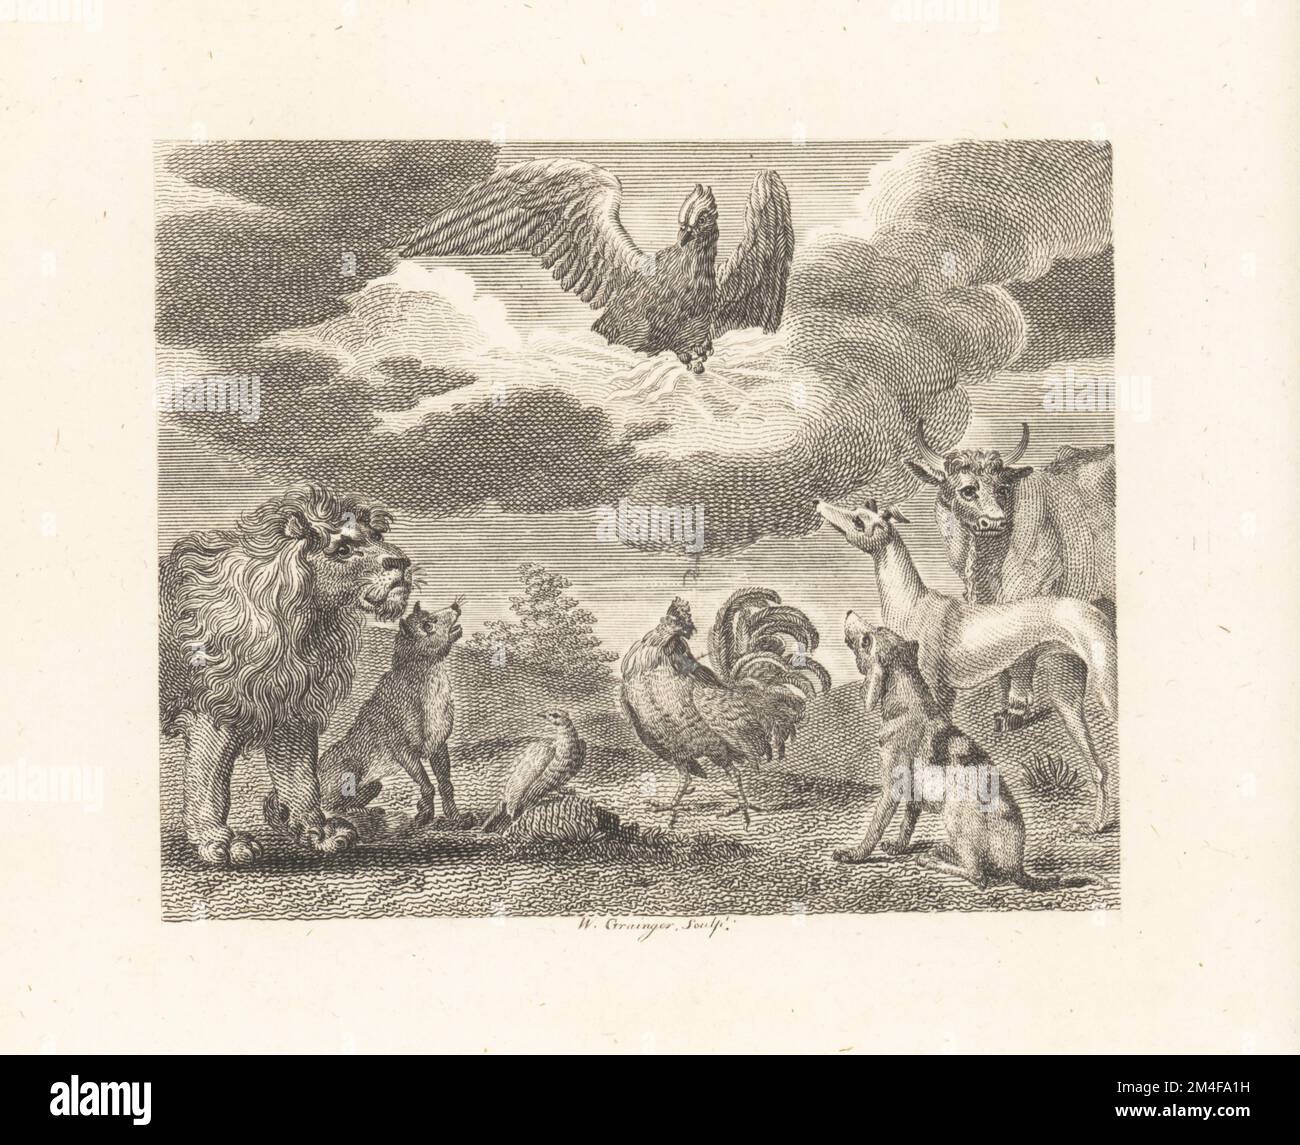 The Eagle and the Assembly of Animals. The eagle of Jove appears in a cloud above a group of envious animals including lion, fox, rooster, pigeon, cow, greyhound and hound. Copperplate engraving by William Grainger after an illustration by John Wootton from Fables by John Gay, with a Life of the Author, John Stockdale, London, 1793. Stock Photo